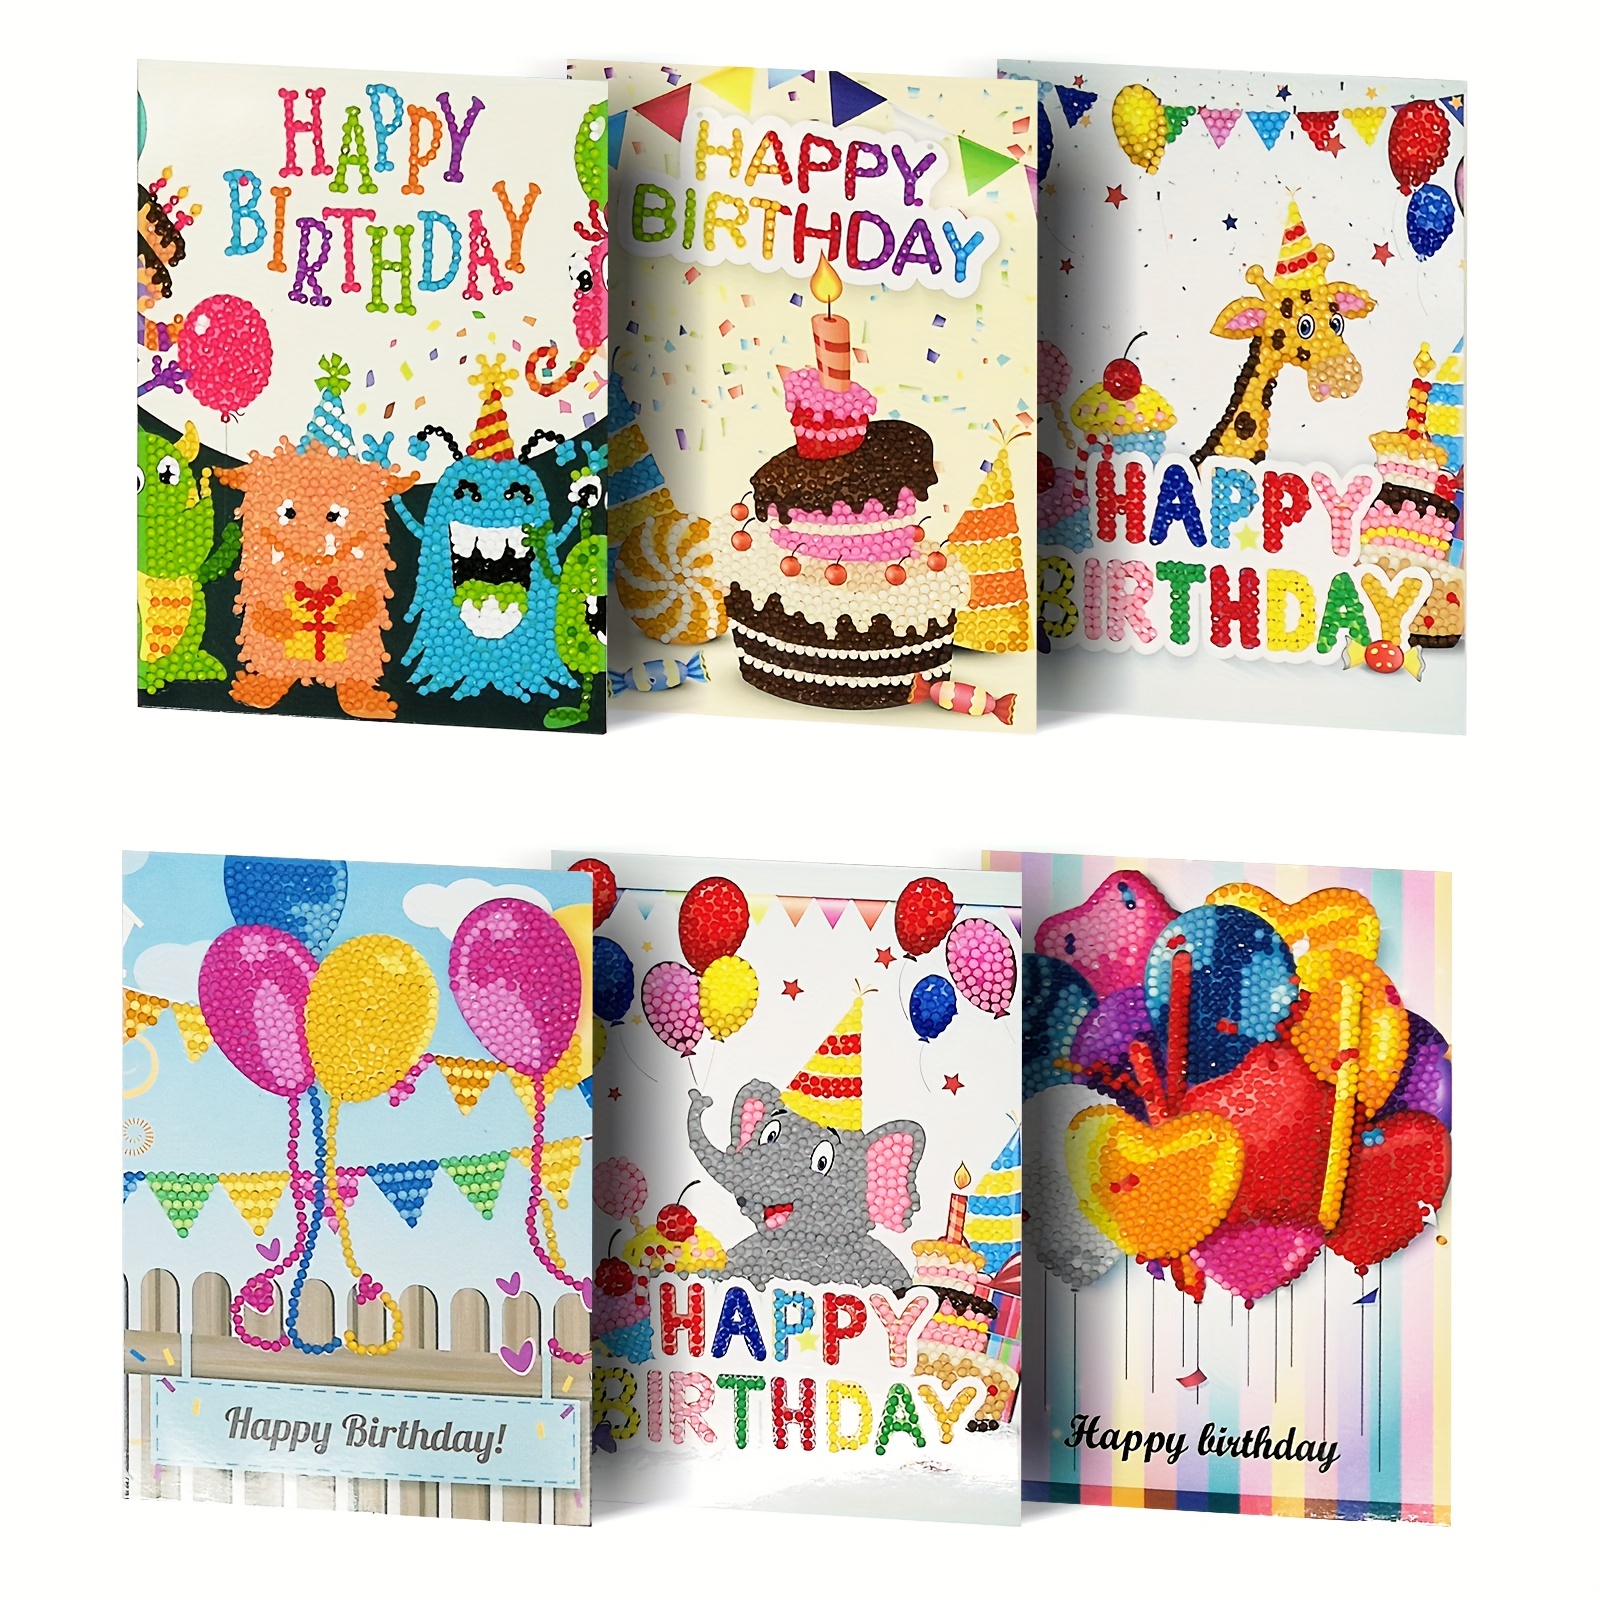 TTNight DIY Birthday Cards - 12 Pcs 5D Special Shaped Diamond Painting Greeting Cards for Birthday and Holiday - Mosaic Making Greeting Cards Art Craf